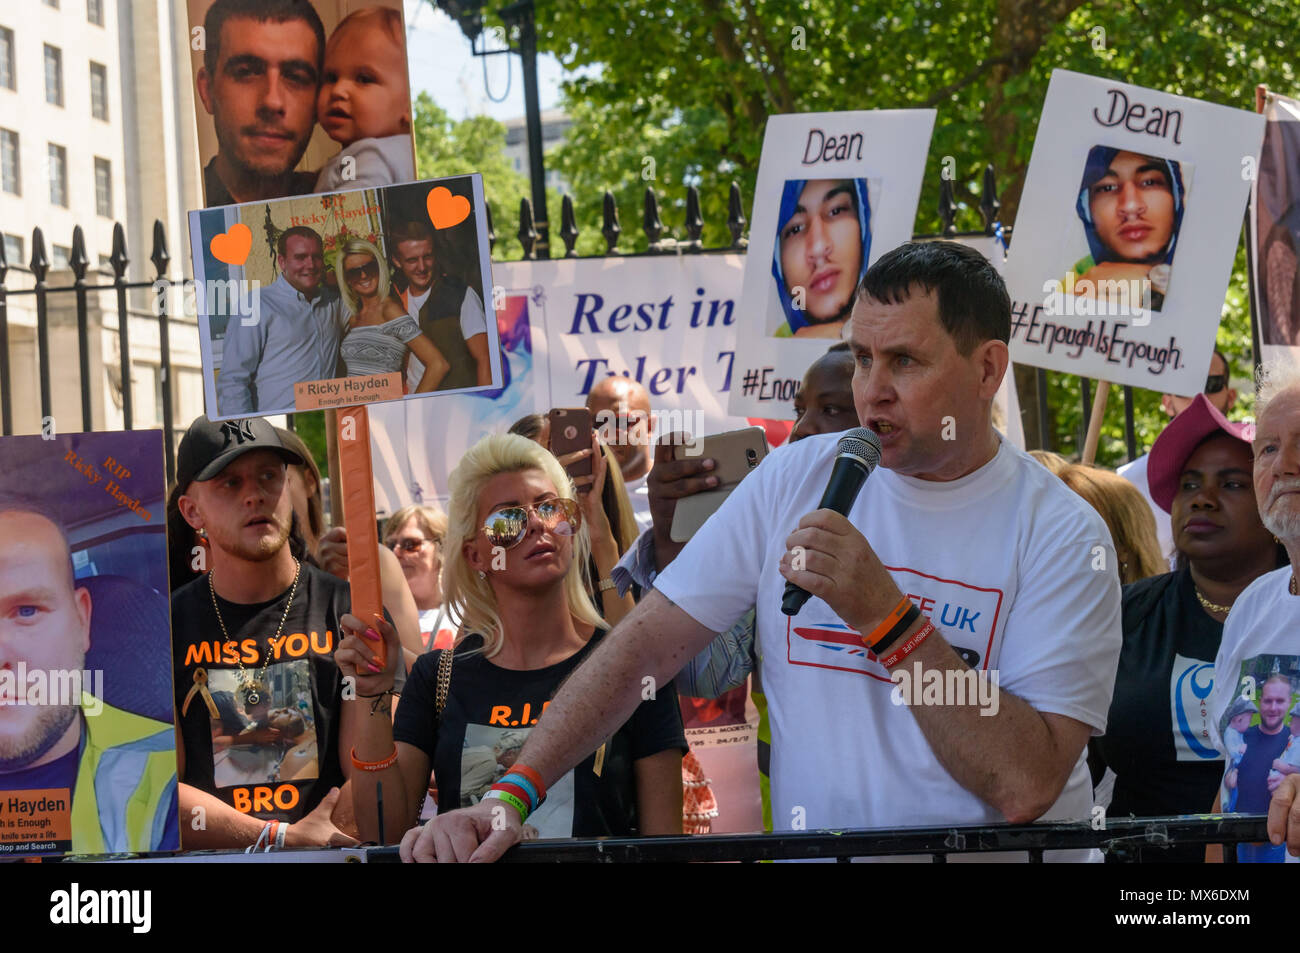 London, UK. 3rd June 2018. Danny O'Brien, awarded the BCAc for his campaign  against knife crime speaks at the protest by community groups and  campaigners against knife and gun crime opposite Downing